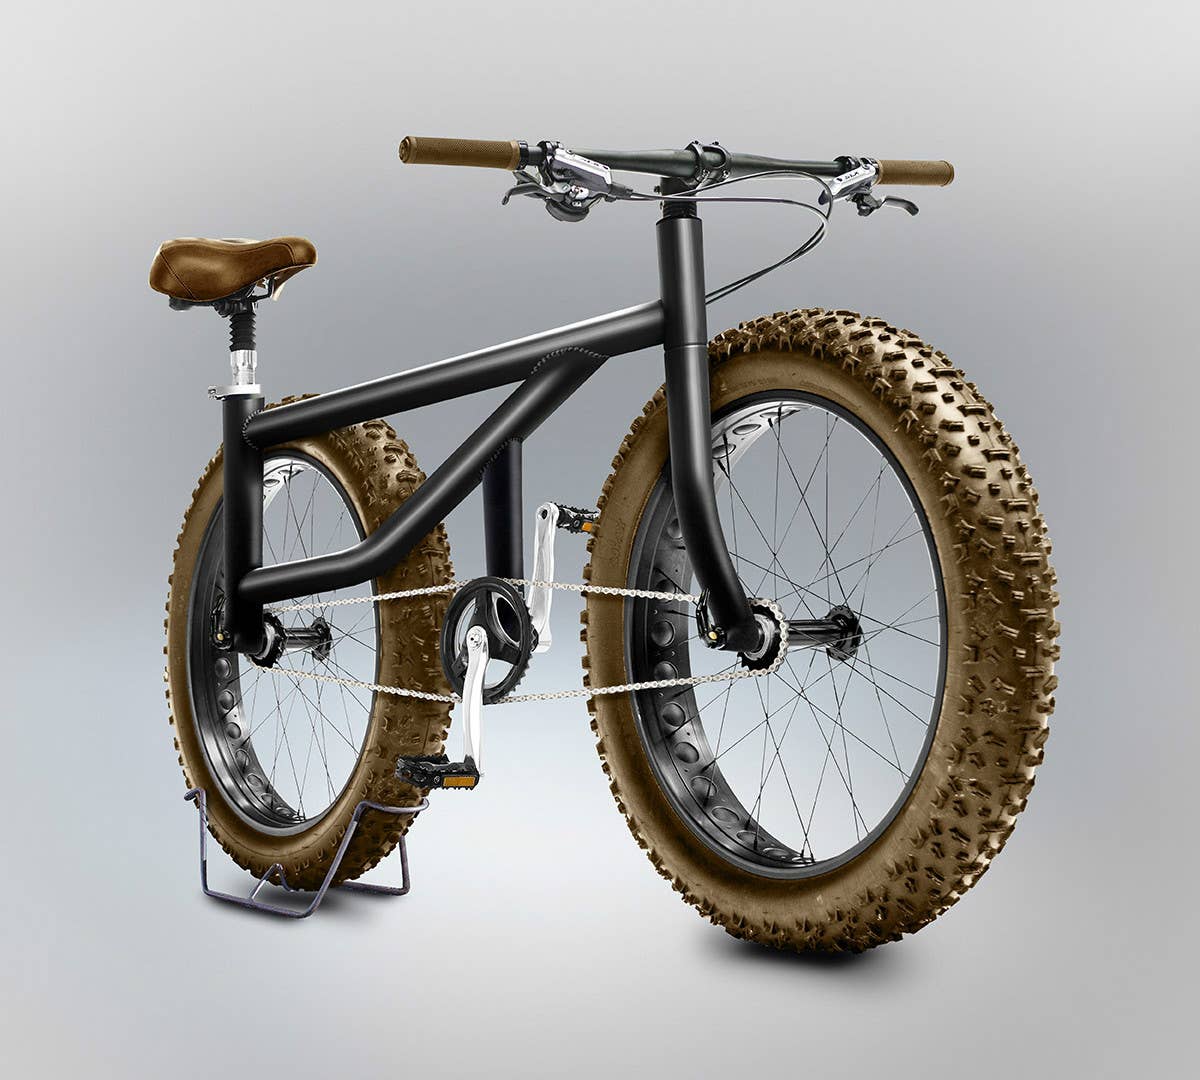 Bikes Based on People’s Attempts to Sketch Them from Memory